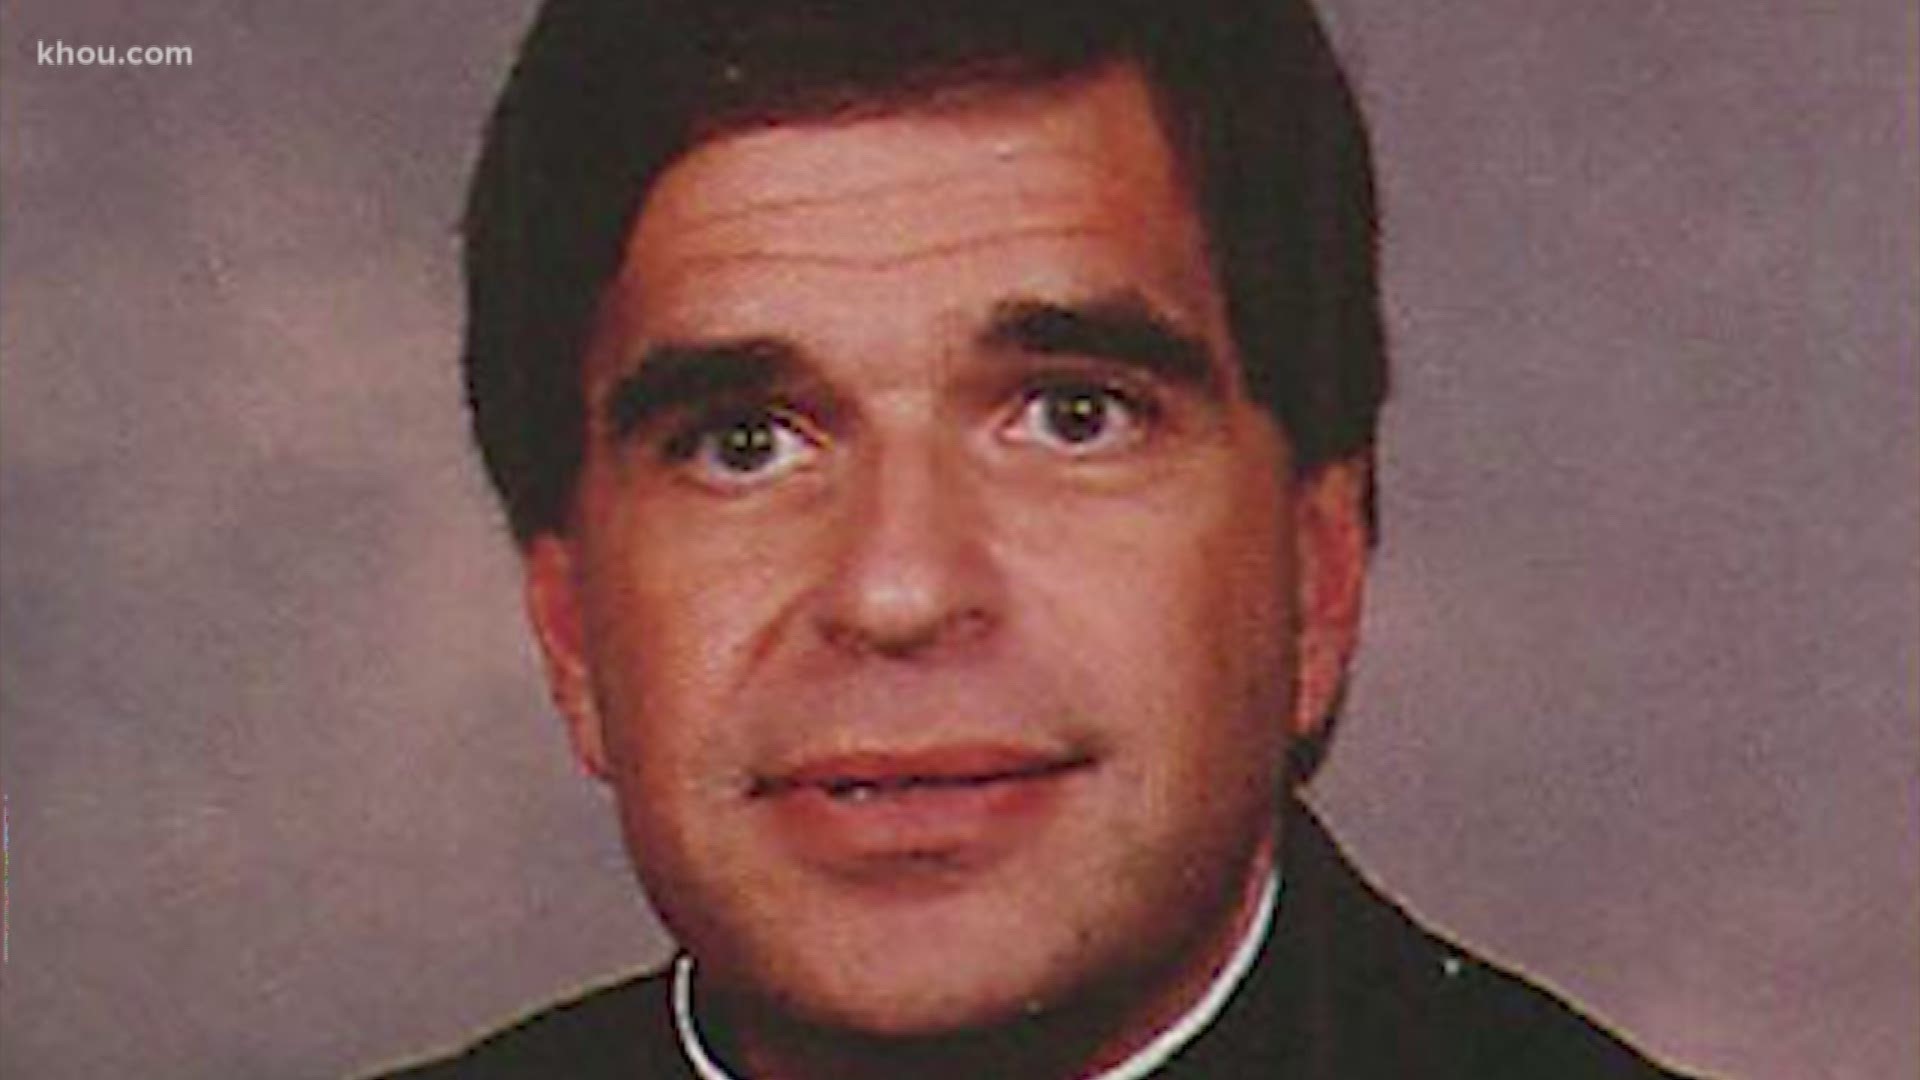 Rev. John Keller was removed from ministry Thursday, hours before the Galveston-Houston Archdiocese released a list of priests "credibly accused" of child sex abuse.